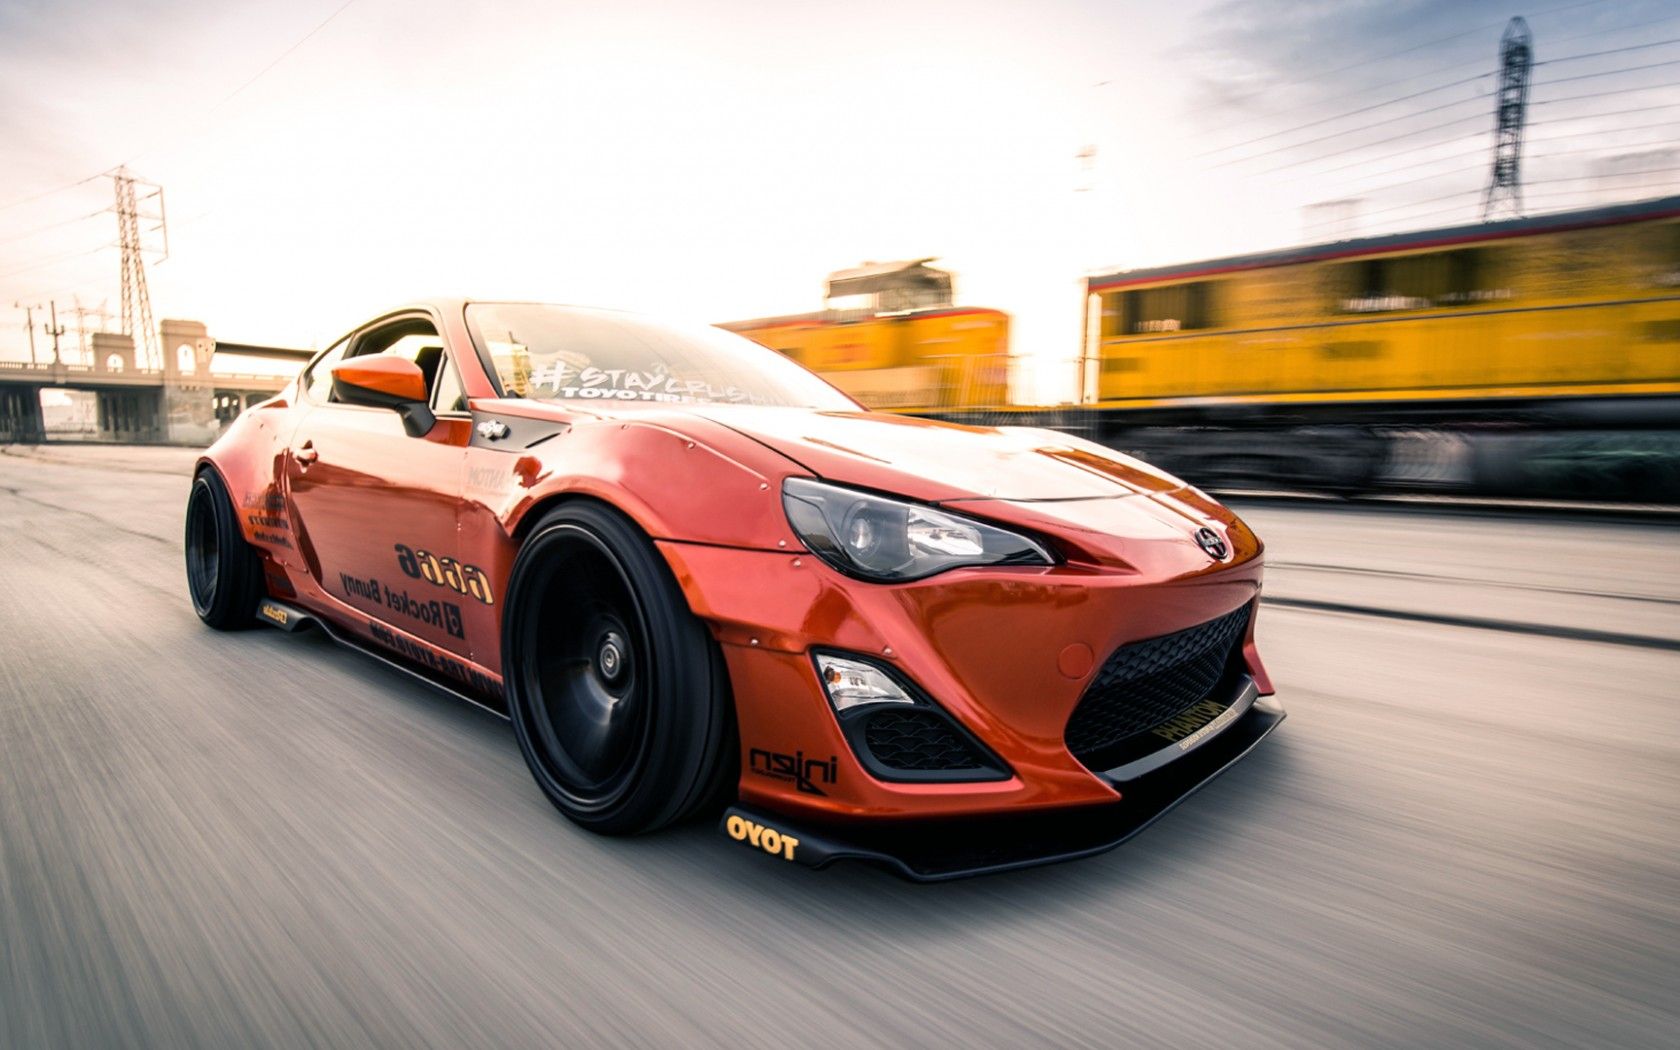 Rocket Bunny 86 wallpaper - Unsorted - Other - Wallpaper Collection